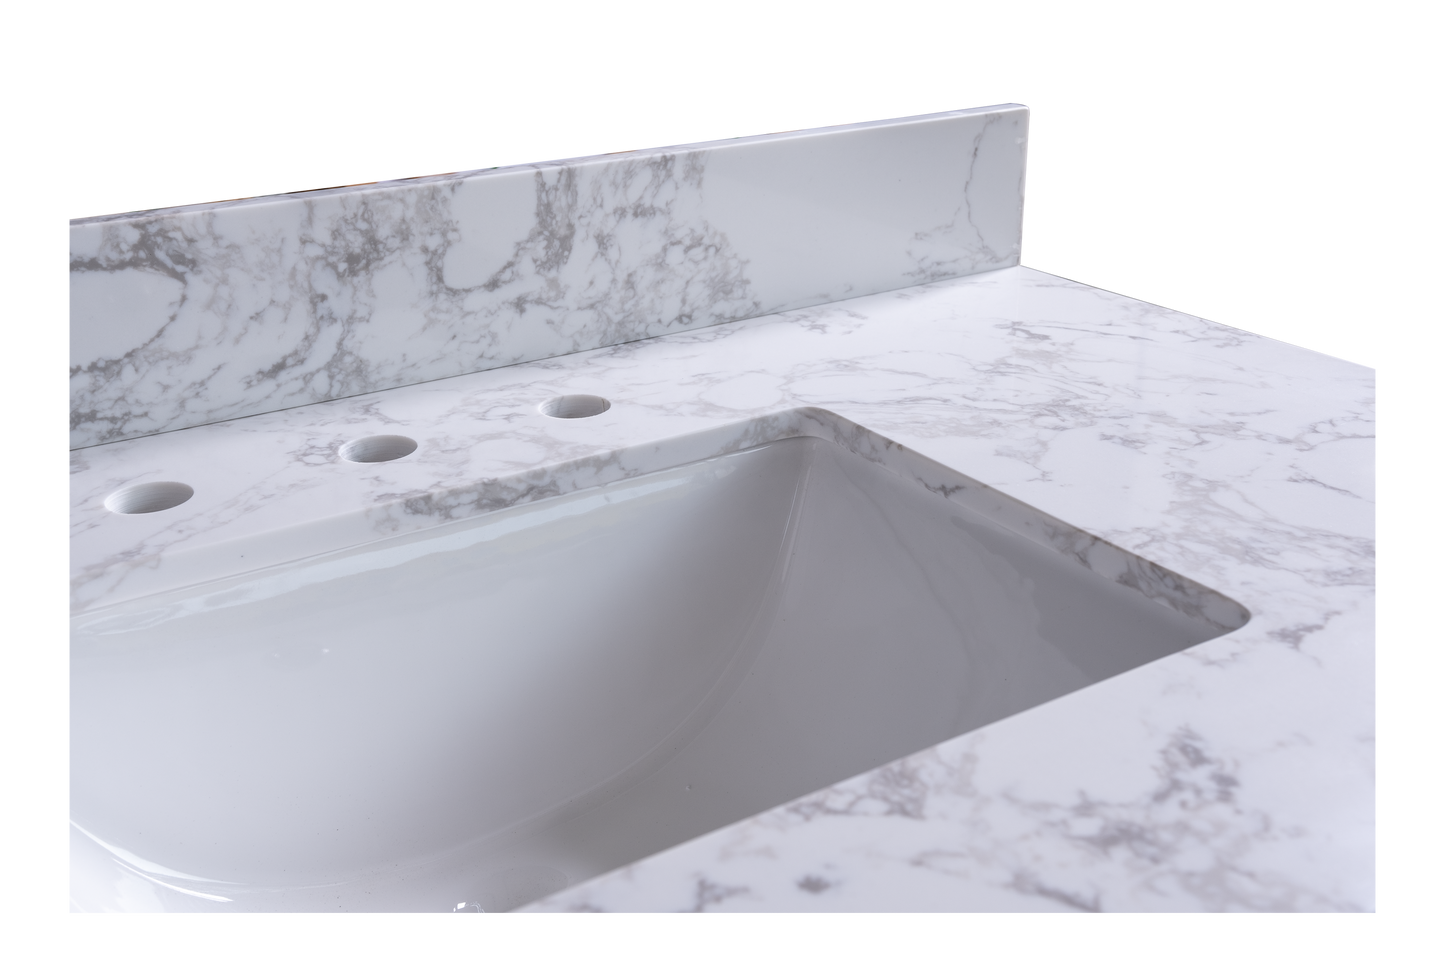 49"x22" bathroom stone vanity top engineered stone carrara white marble color with rectangle undermount ceramic sink and 3 faucet hole with back splash .